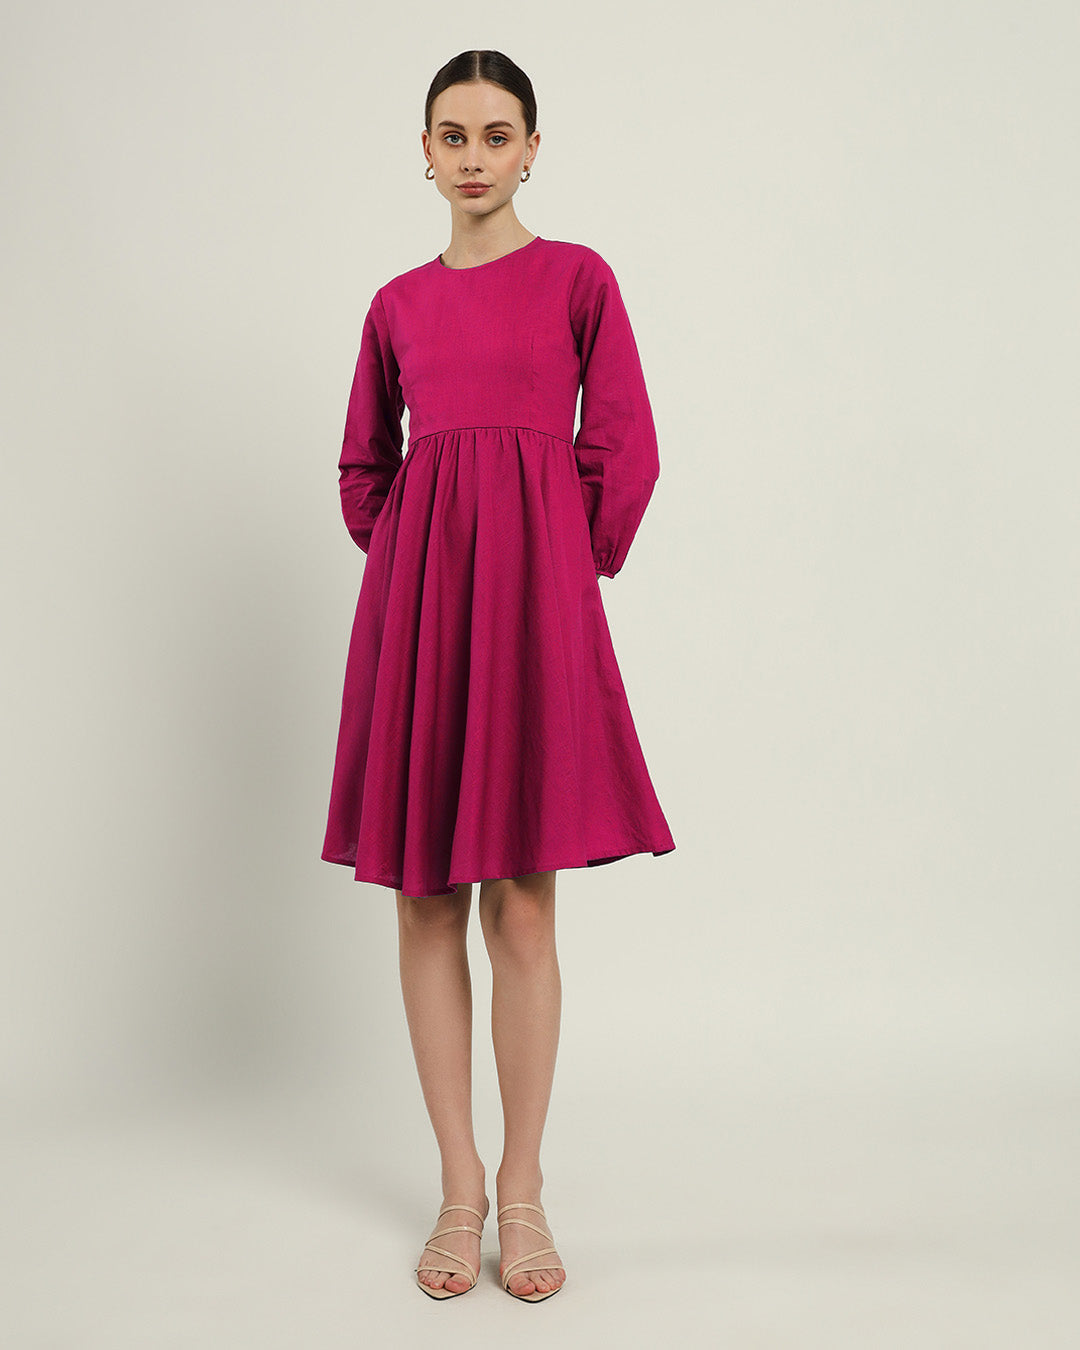 The Exeter Berry Cotton Dress